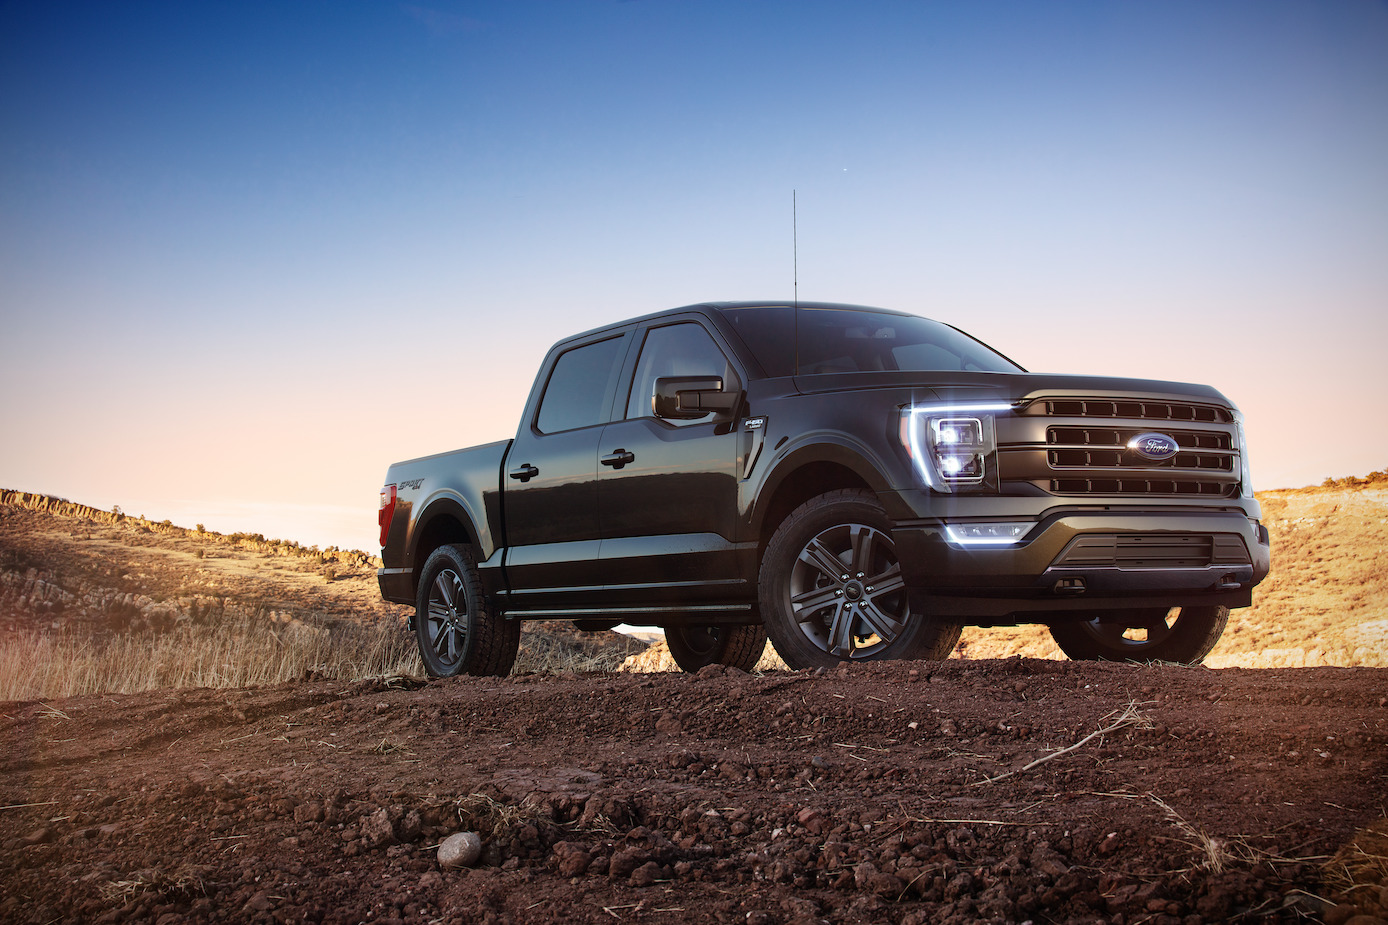 All-new Ford F-150 Lariat in Space White. The Ford F-150's size seems to be increasing over time